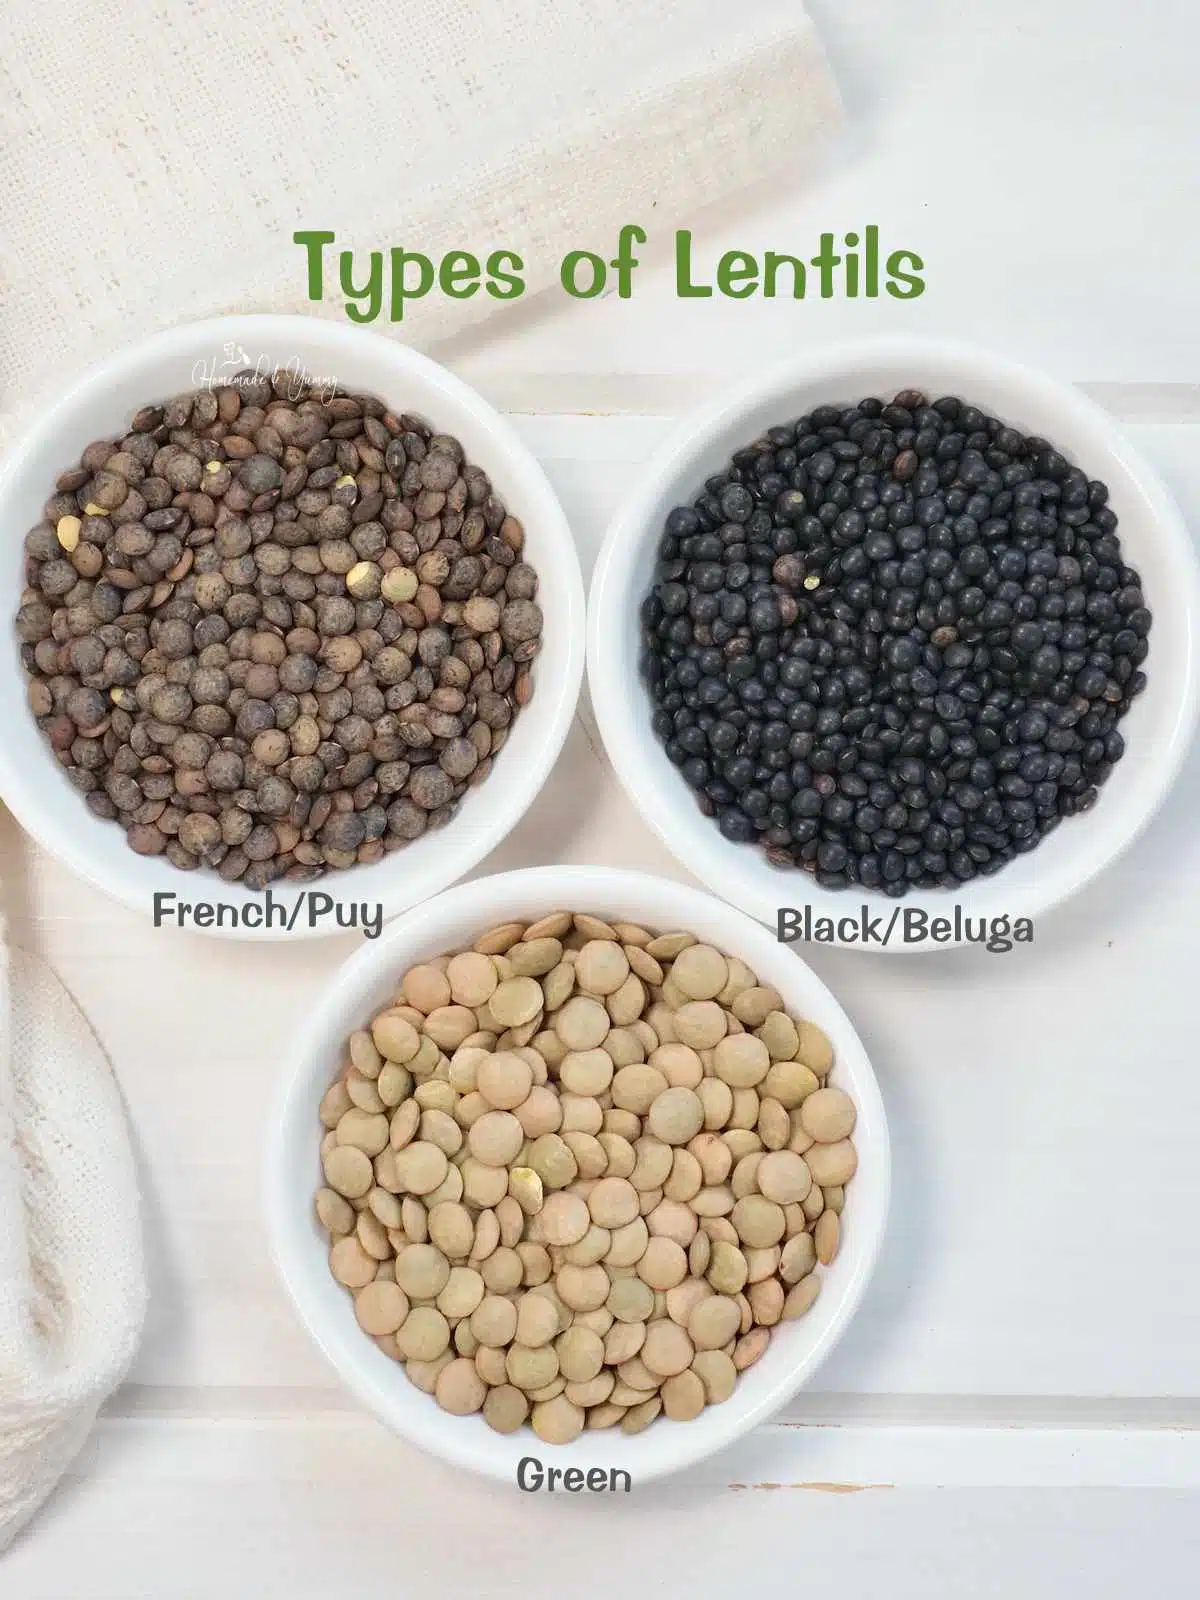 3 types of lentils, green, black and French